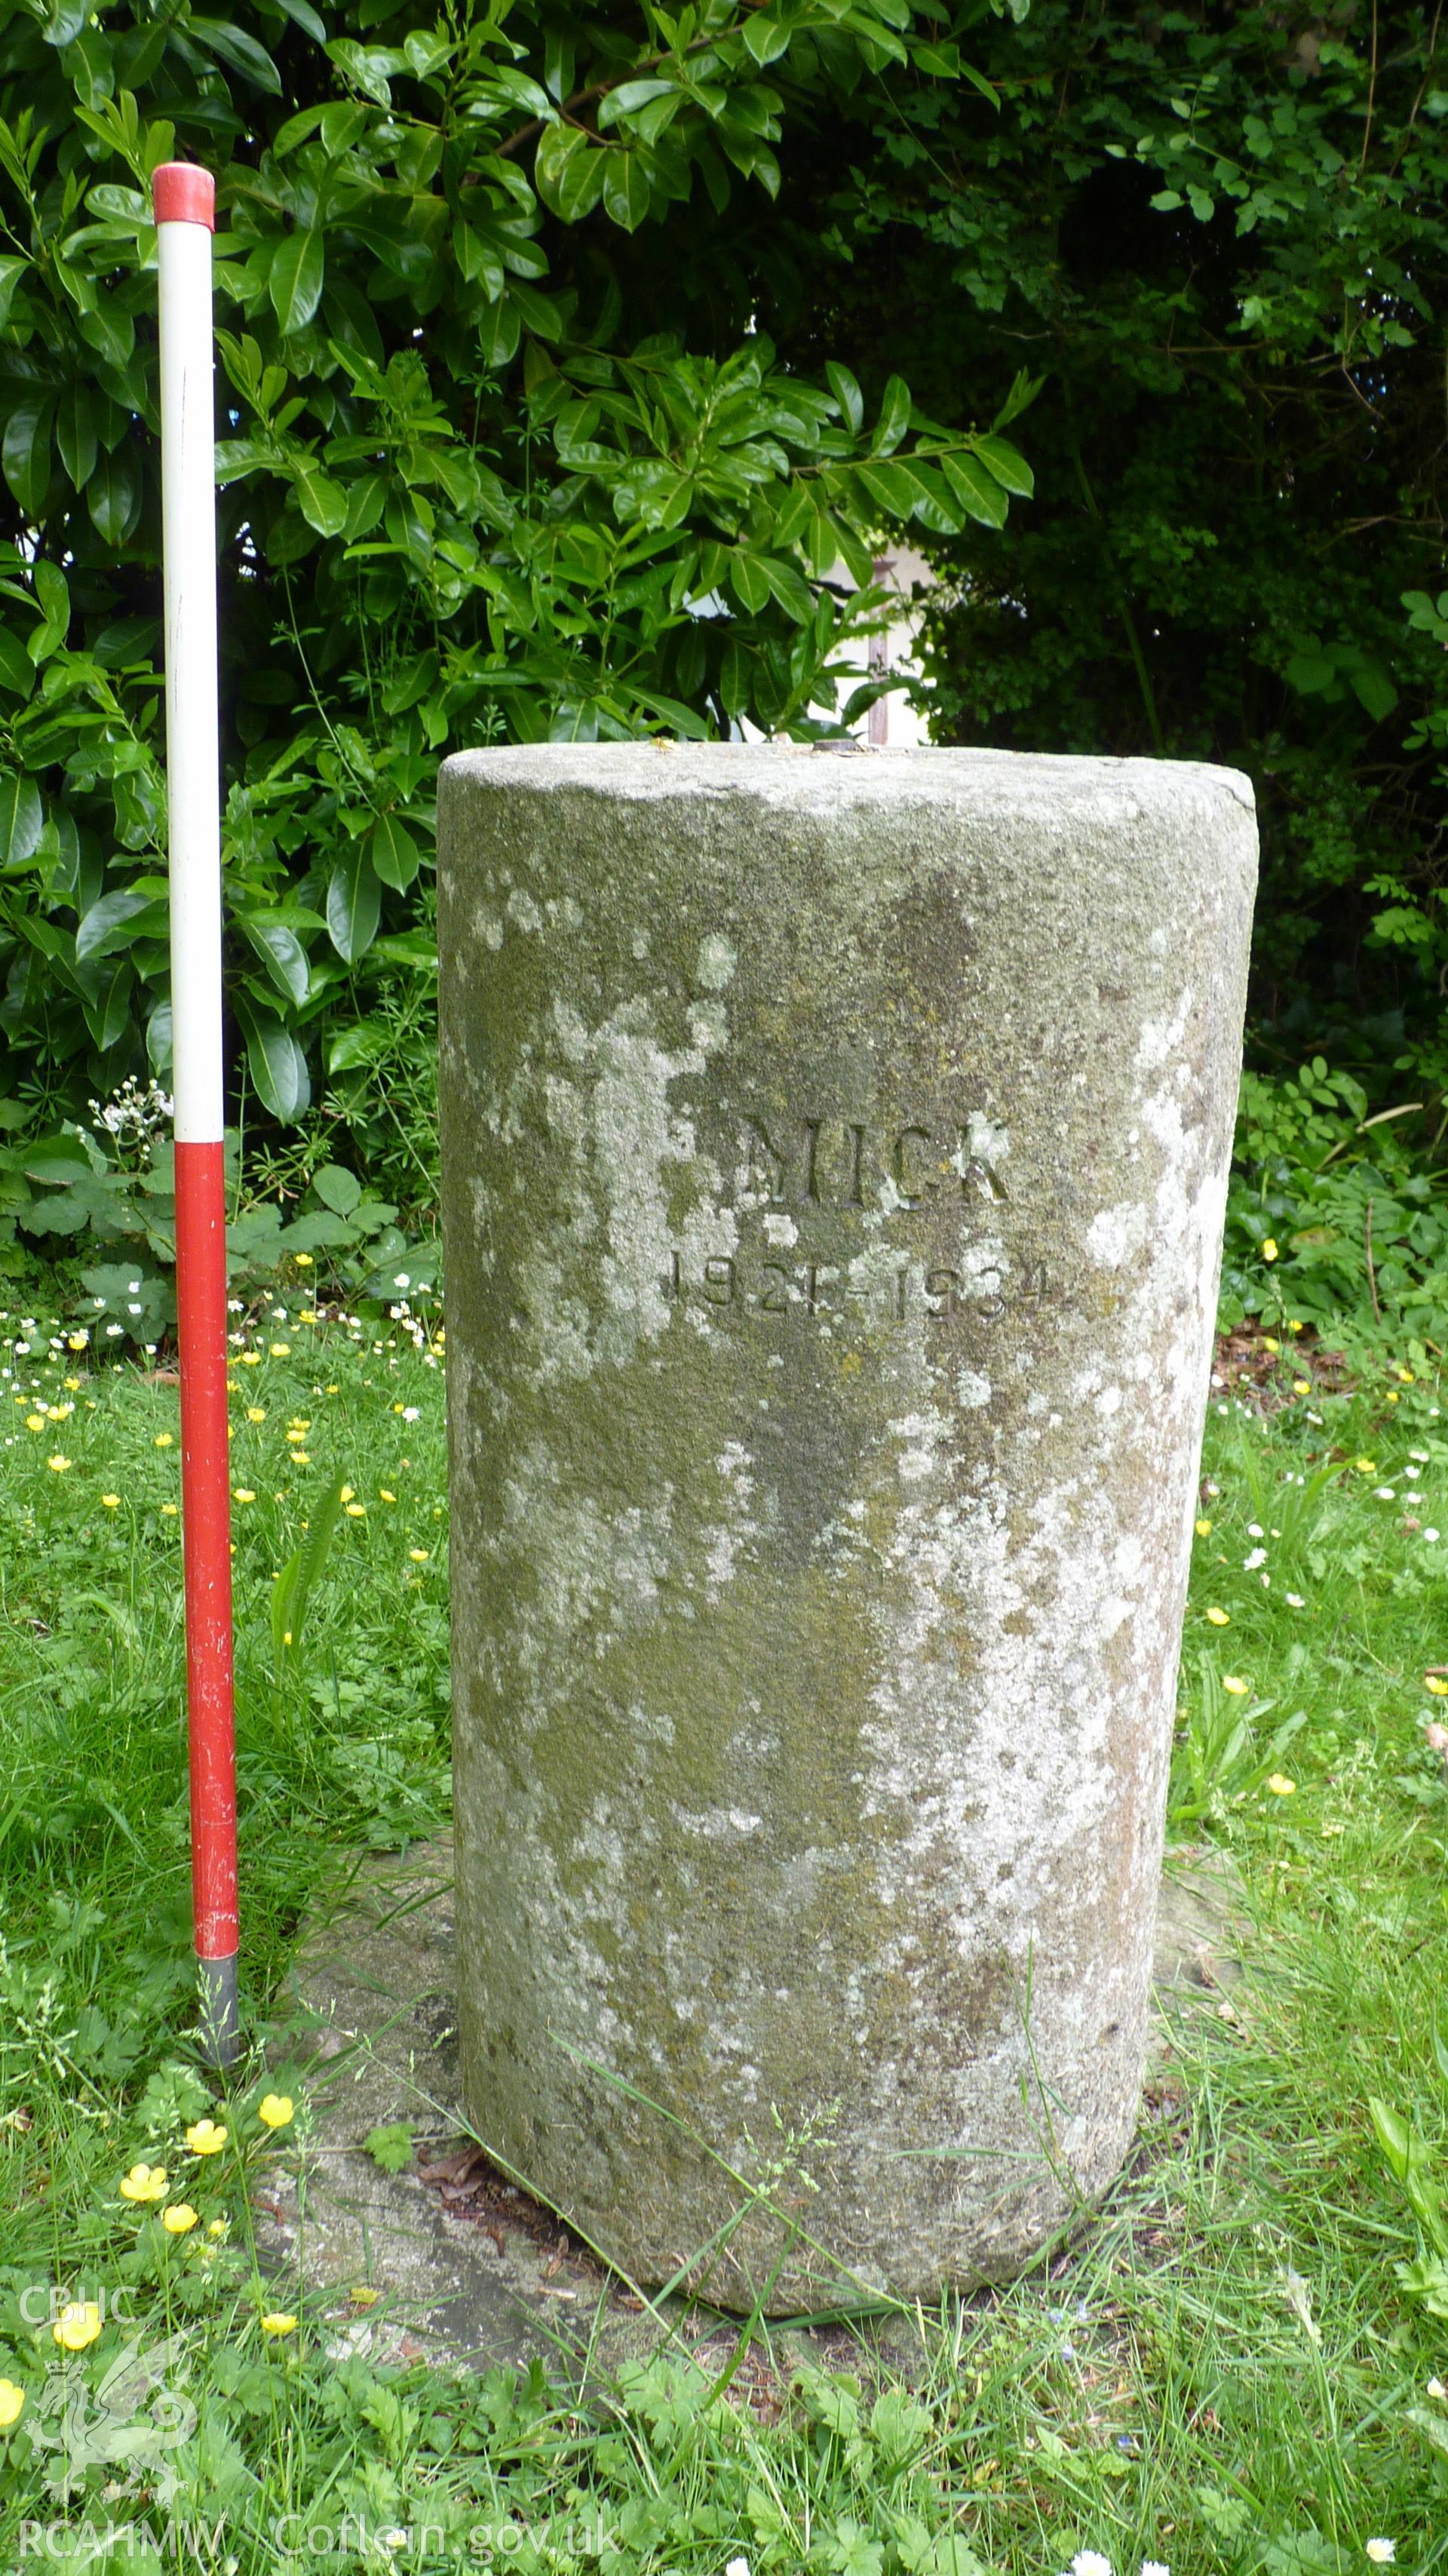 'Monument at northern end of front lawn, engraved "Mick, 1921-1934." 1m scale.' Photographed as part of archaeological work at Coed Parc, Newcastle, Bridgend, carried out by Archaeology Wales, 2016. Project no. P2432.